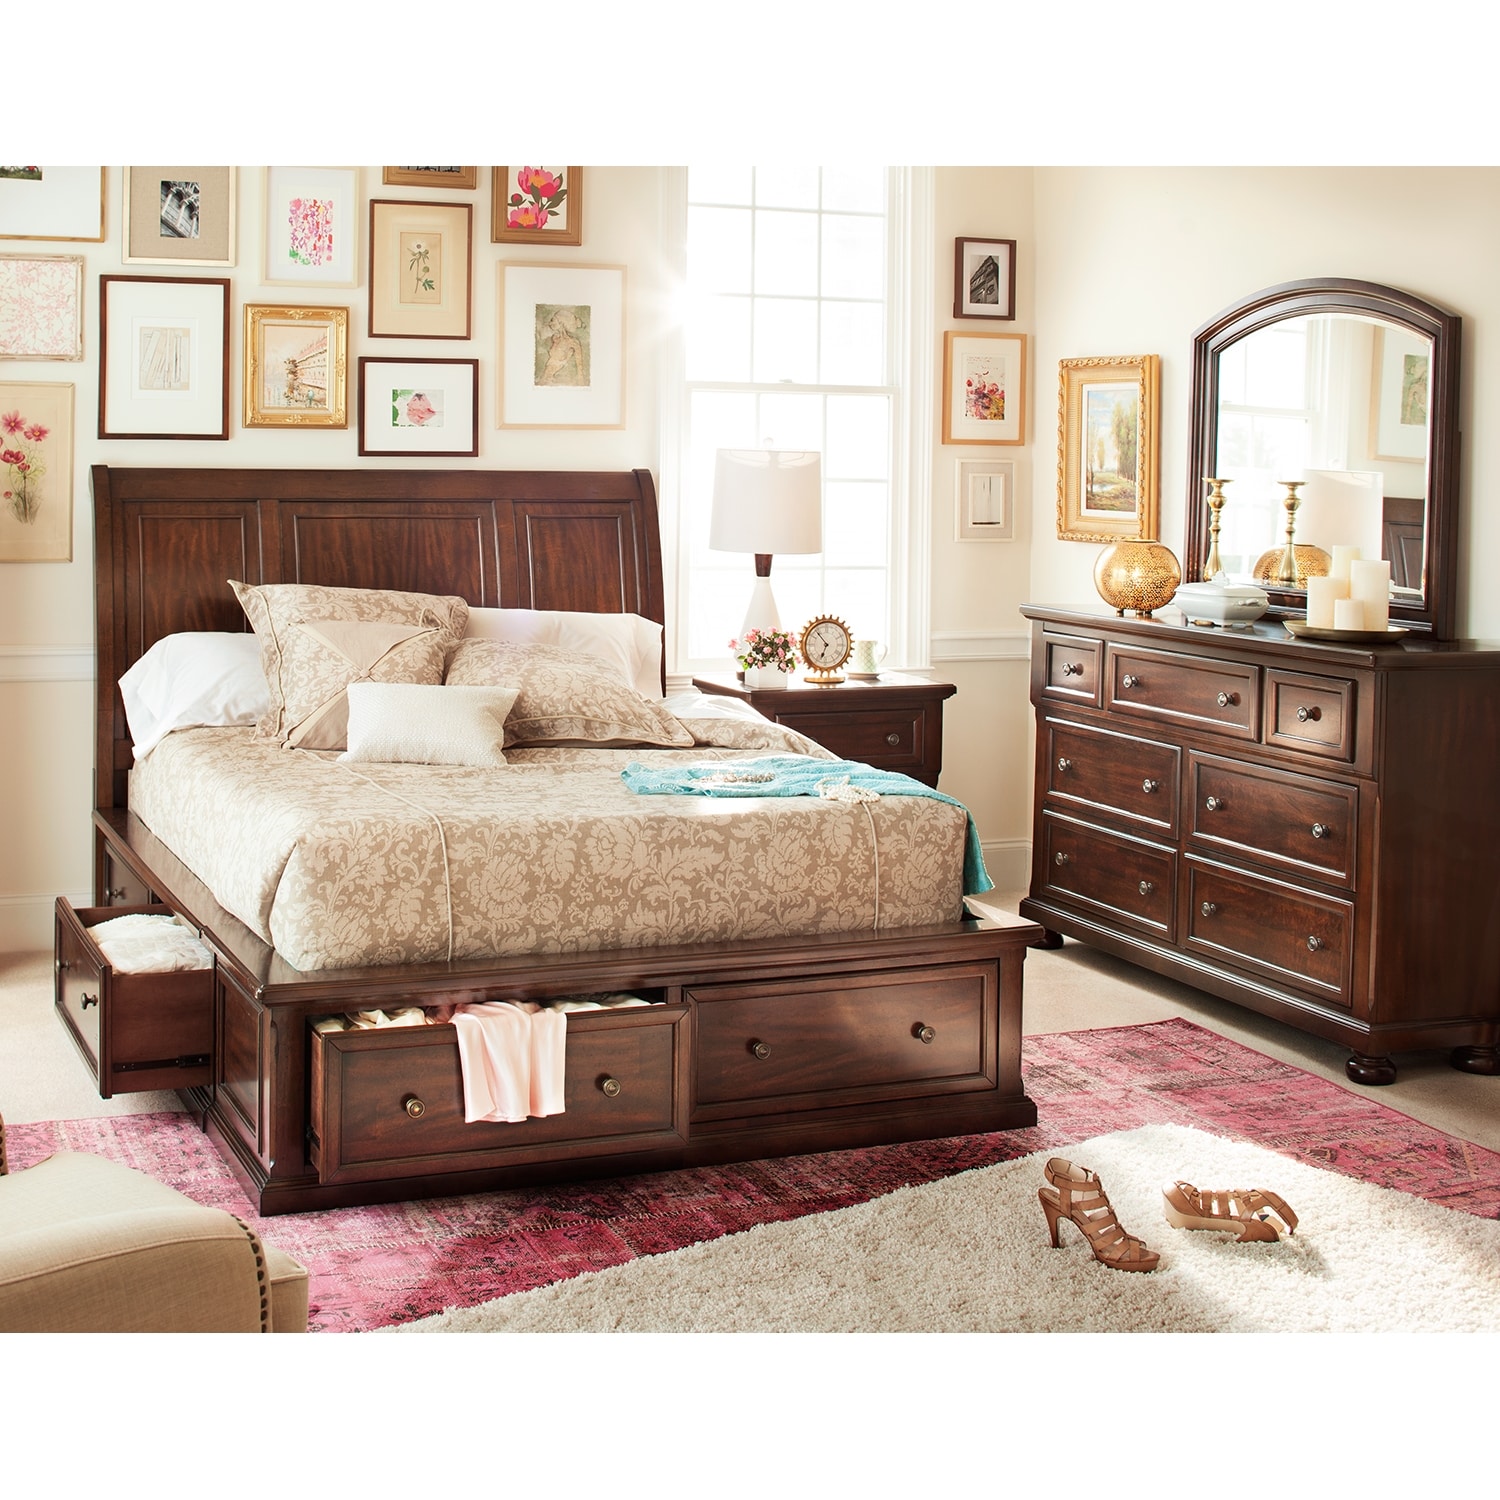 Hanover Queen Storage Bed - Cherry | Value City Furniture